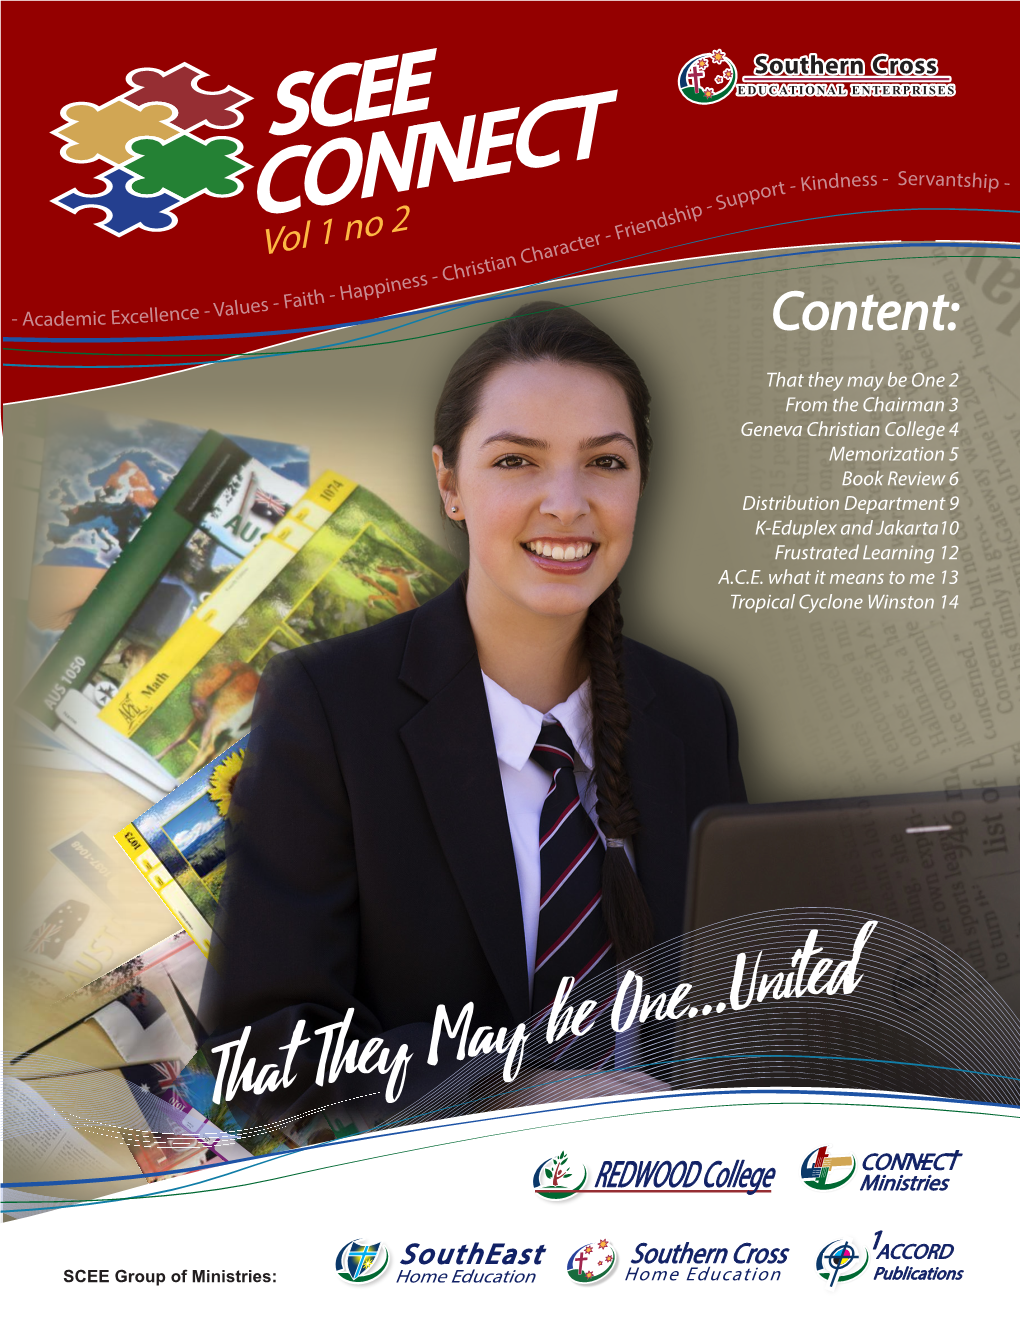 CONNECT Ndshi Rie Er - F Aract Vol 1 No 2 an Ch Christi Iness - H - Happ Lues - Fait - Academic Excellence - Va Content